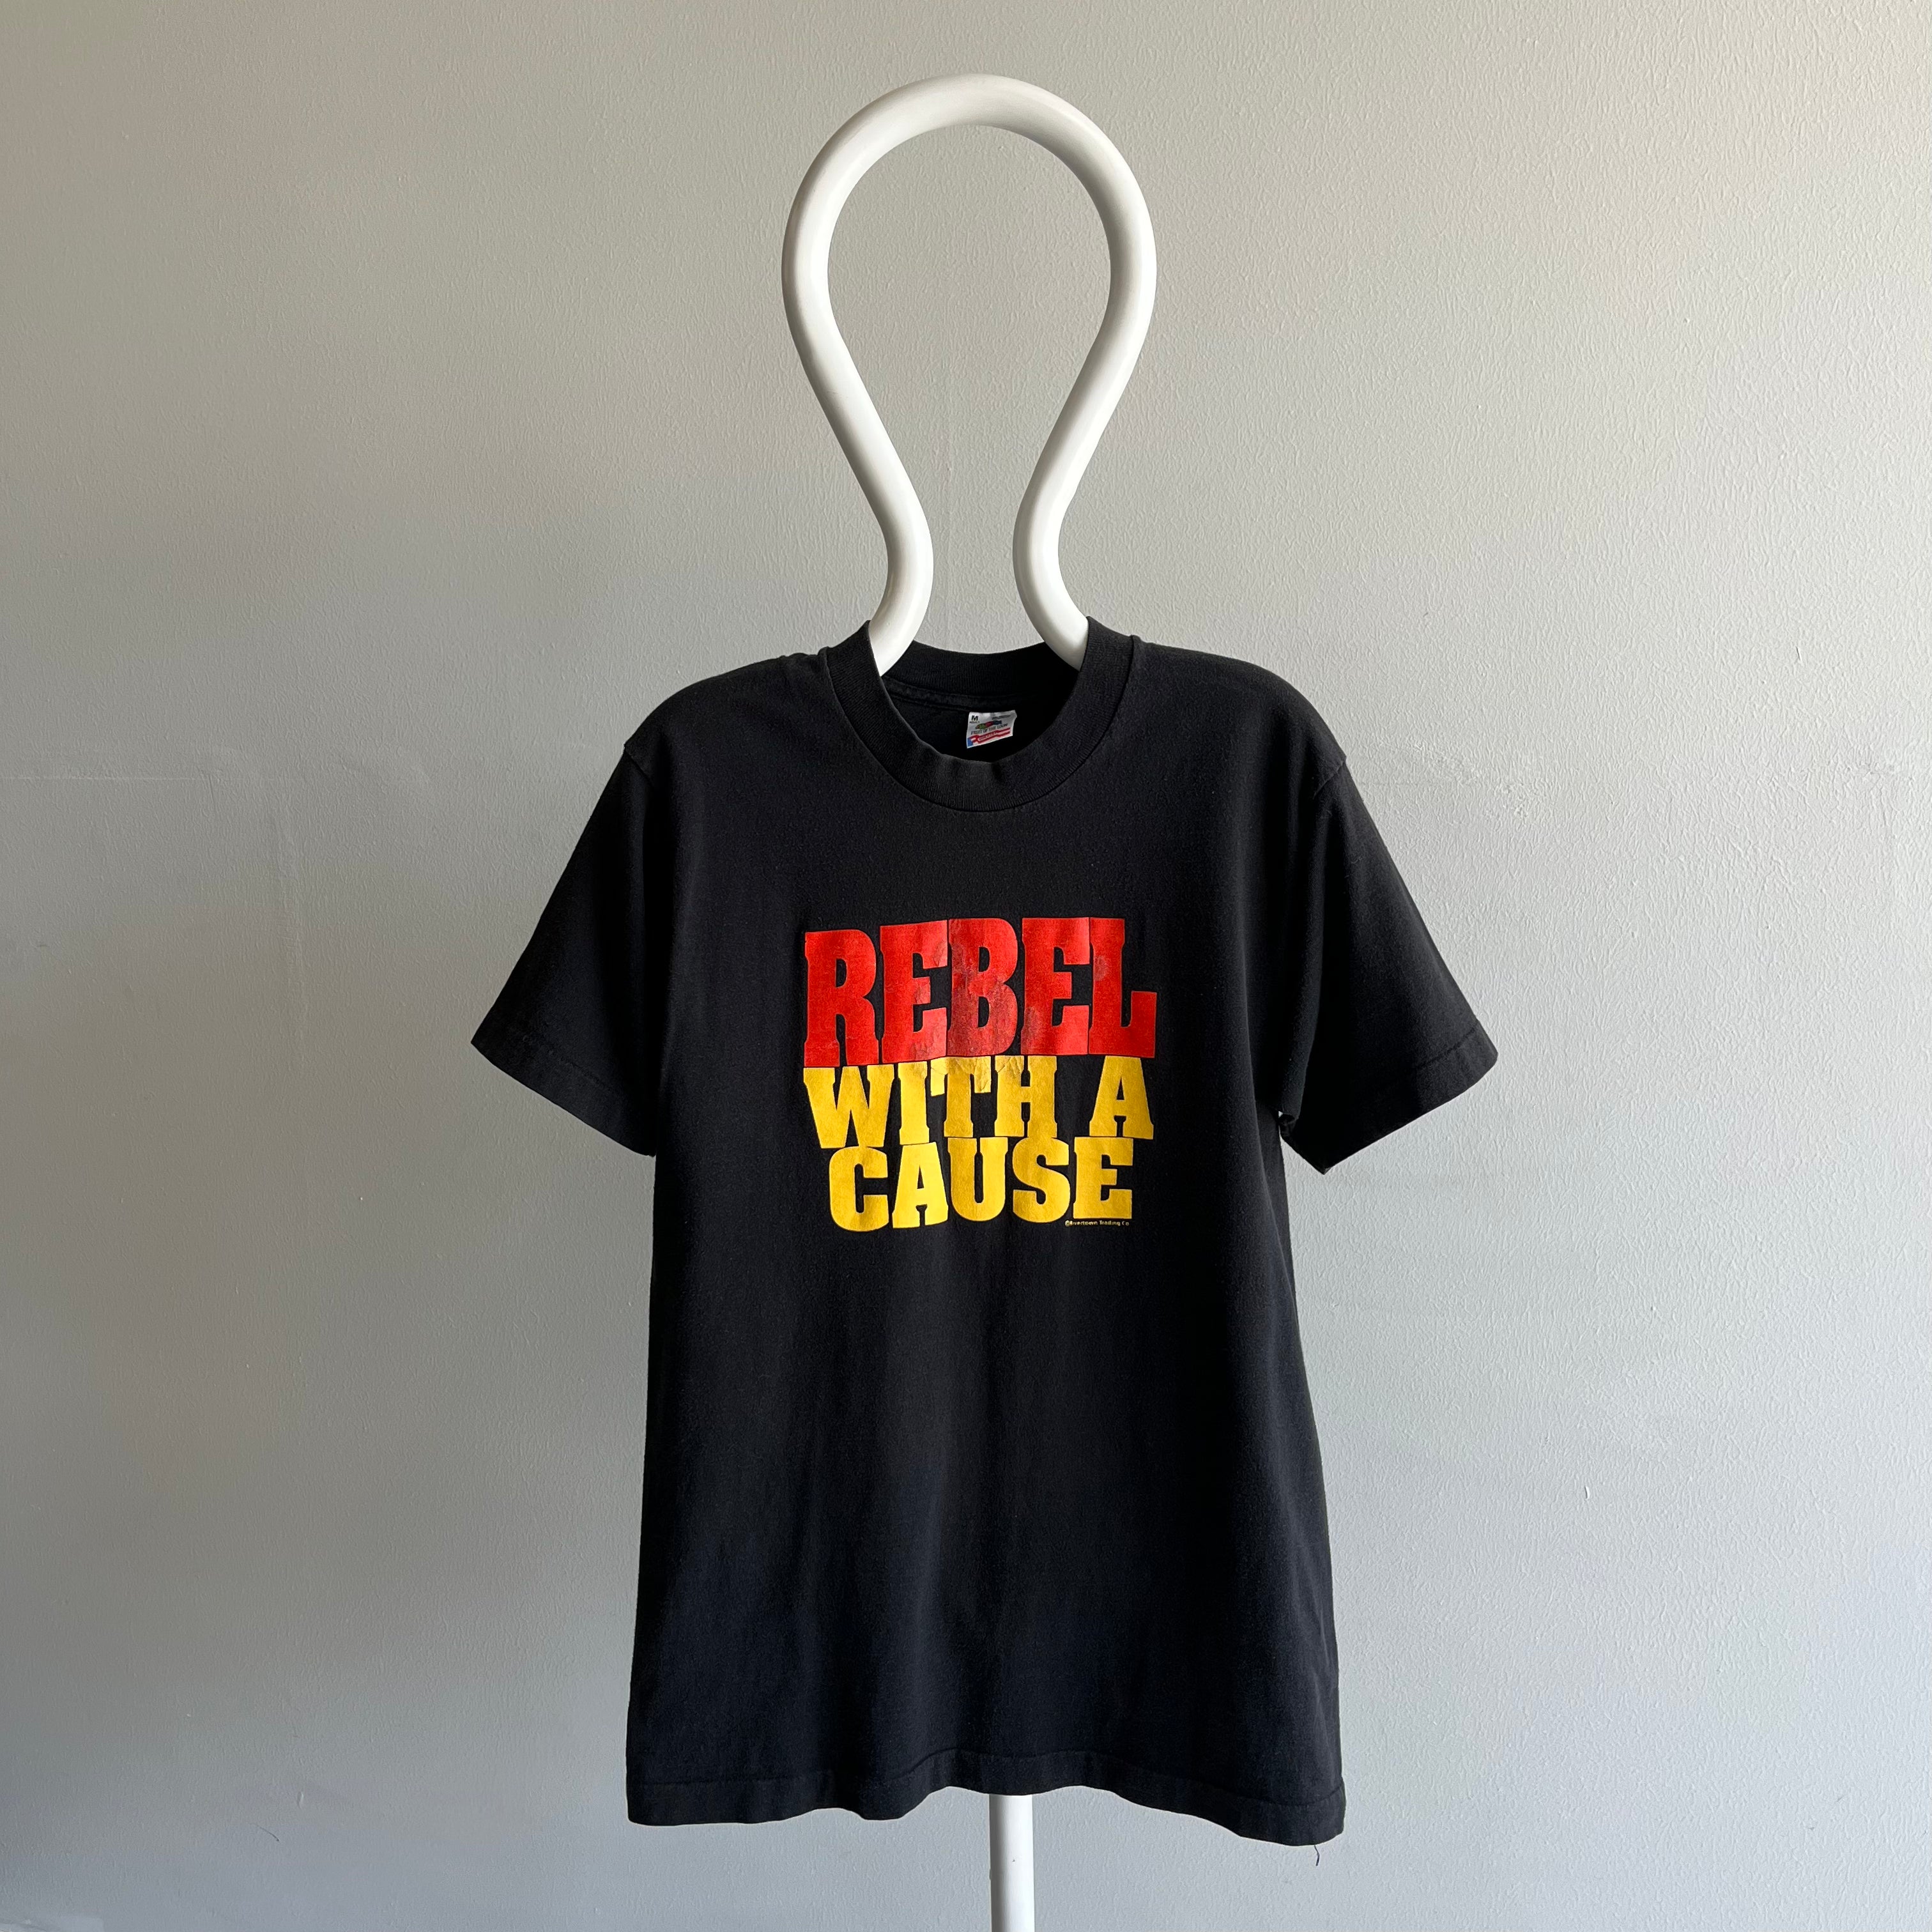 1980s Rebel With A Cause Cotton T-Shirt by FOTL